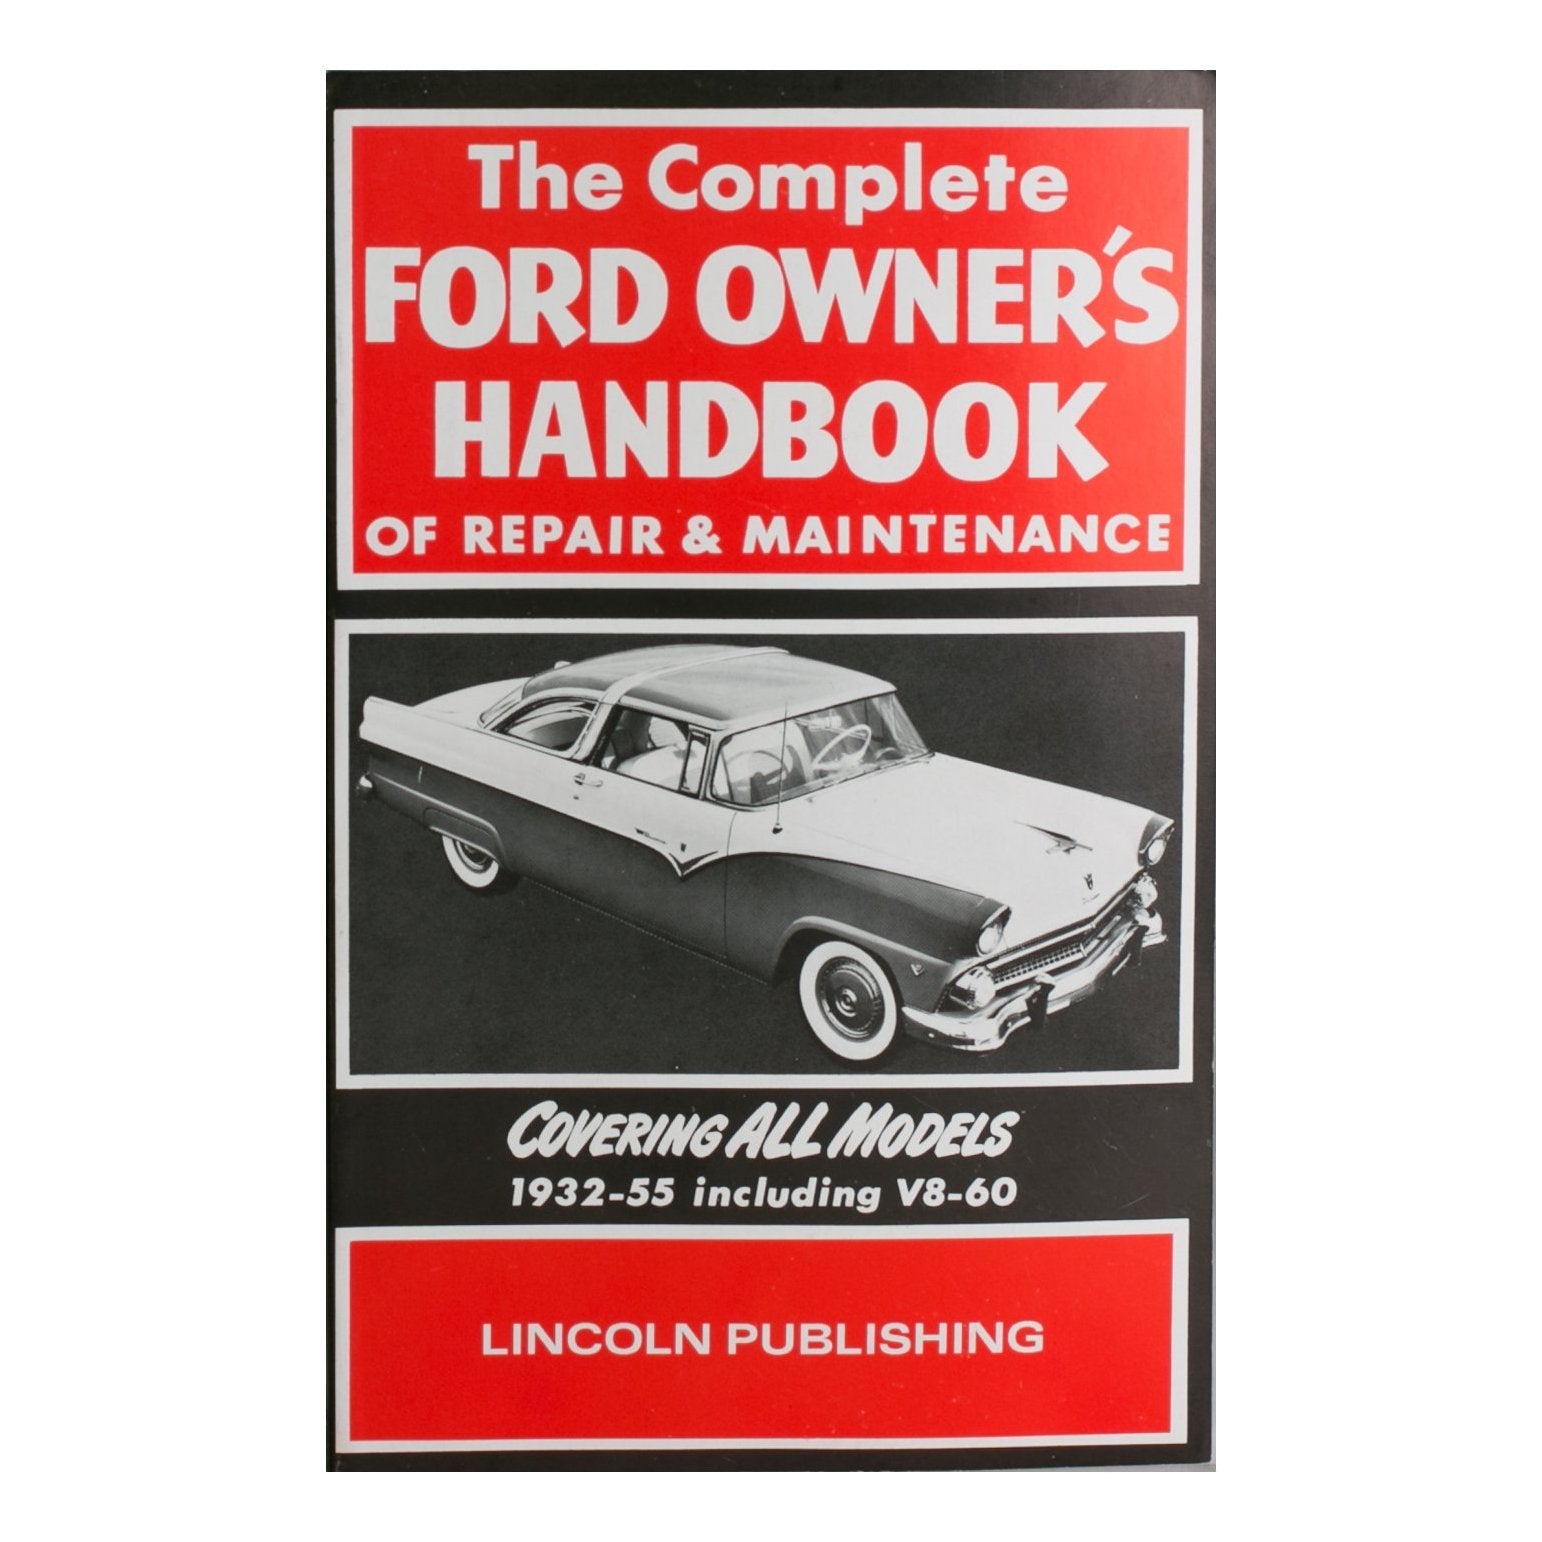 The Complete Ford Owners Handbook of Repair & Maintenance • 1932-55 Ford